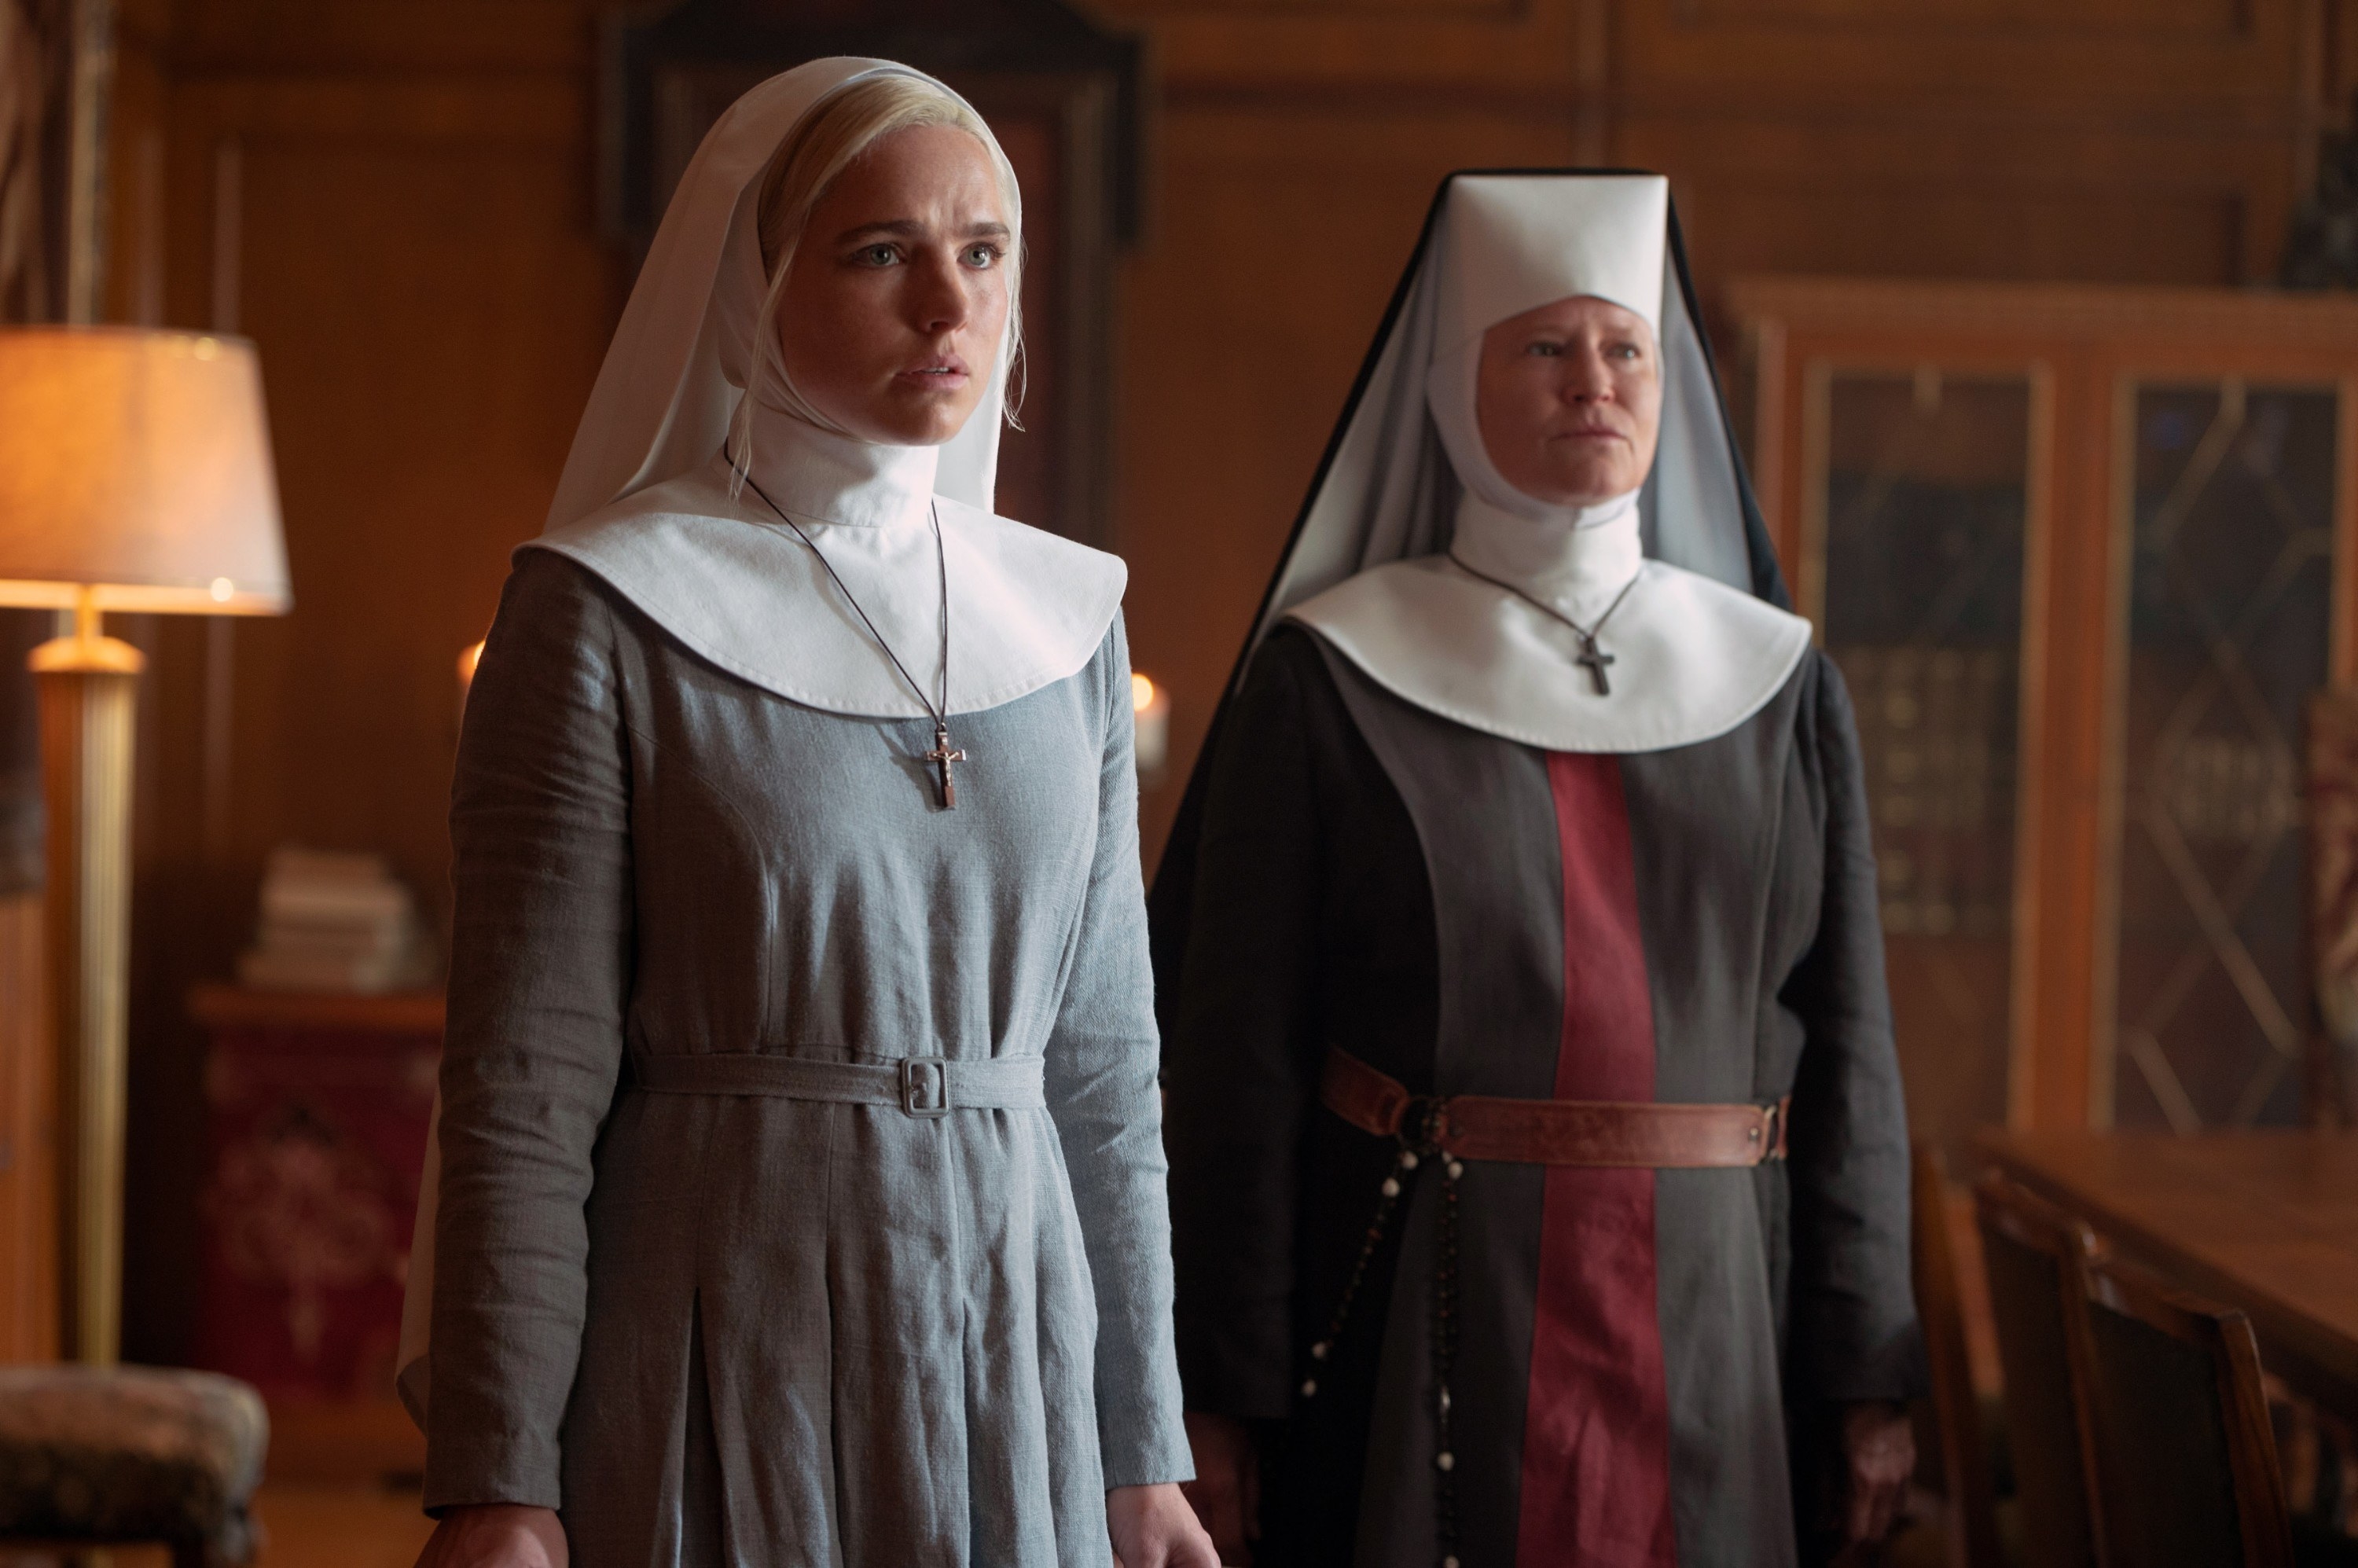 Two nuns stand in an office, looking worried